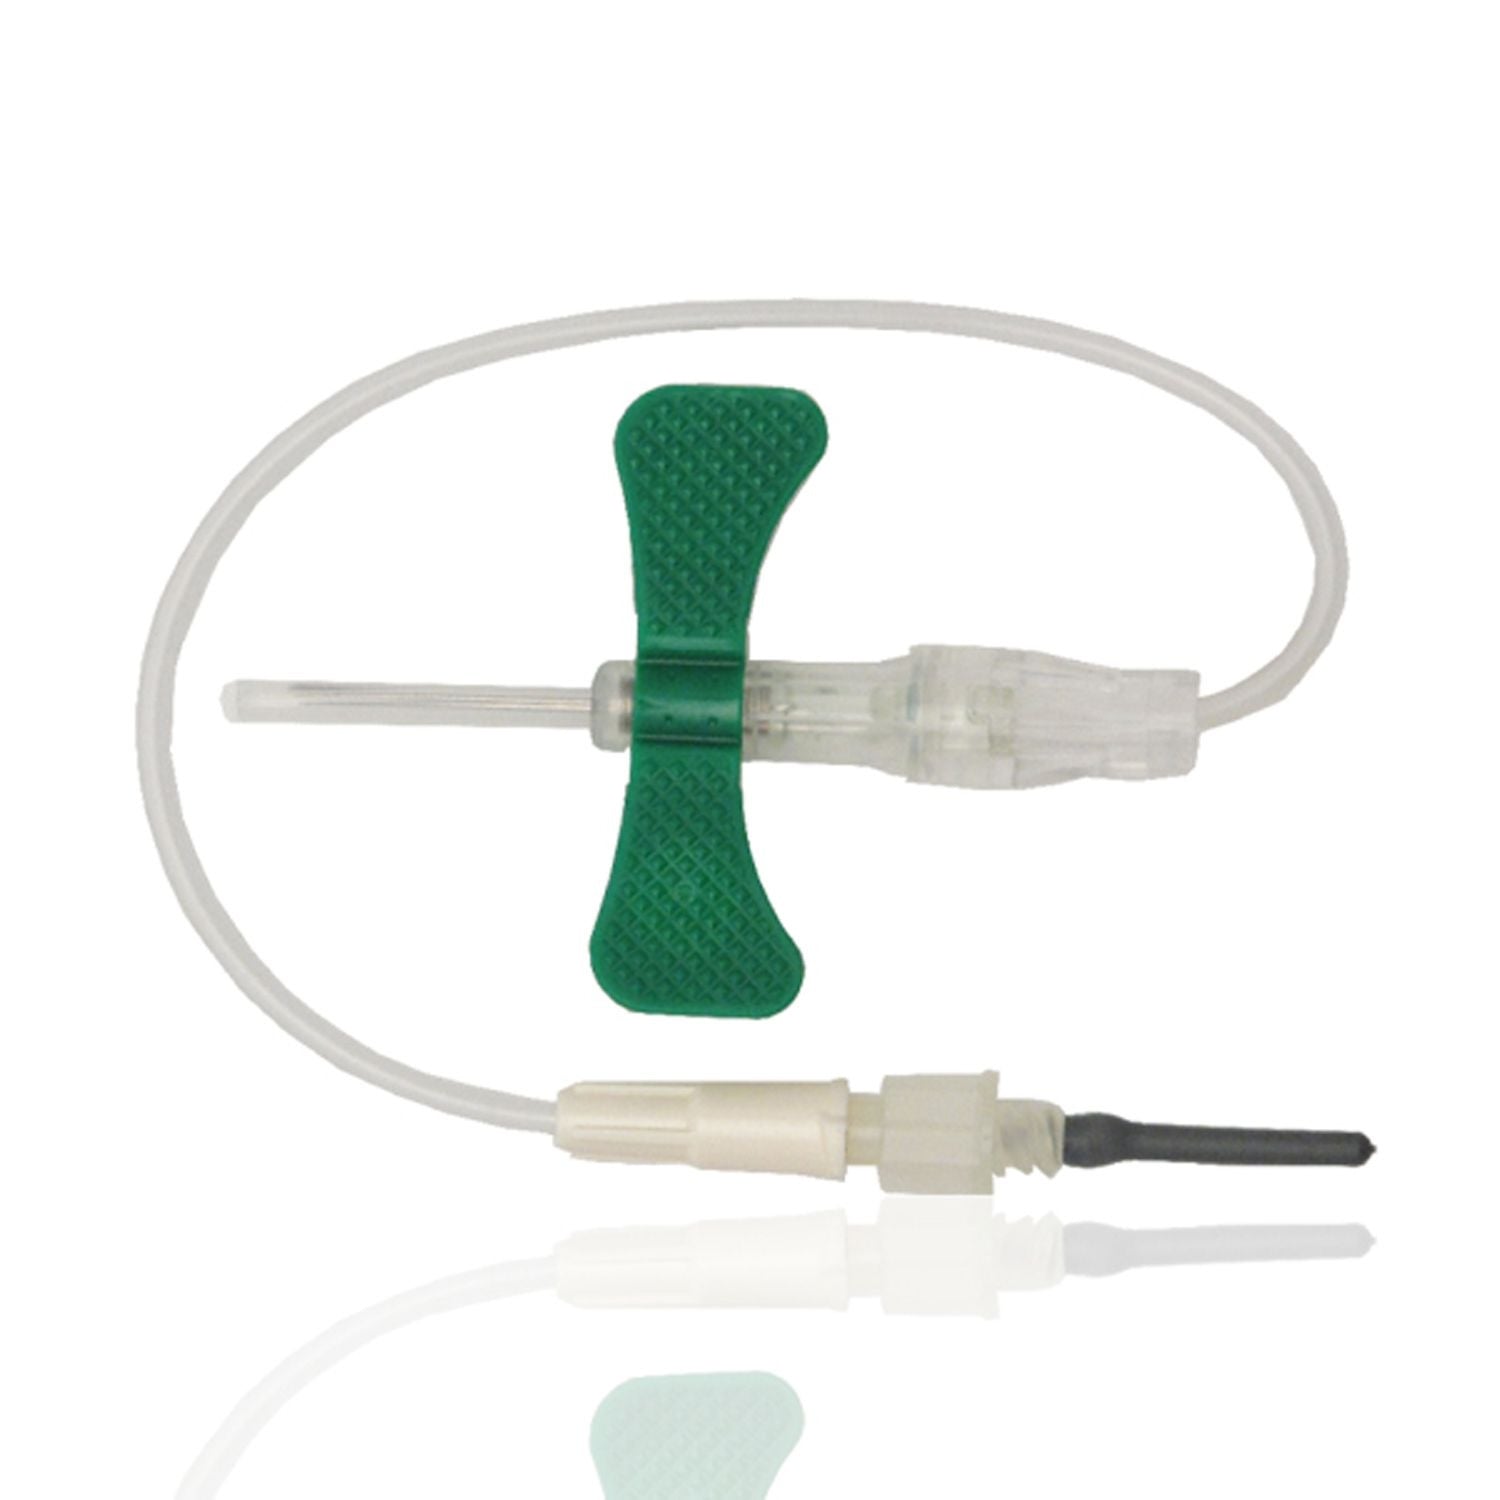 BD Vacutainer Push Button Blood Collection System | Luer Adapter | 25G x 12" Tubing | 0.75" Needle | Pack of 200